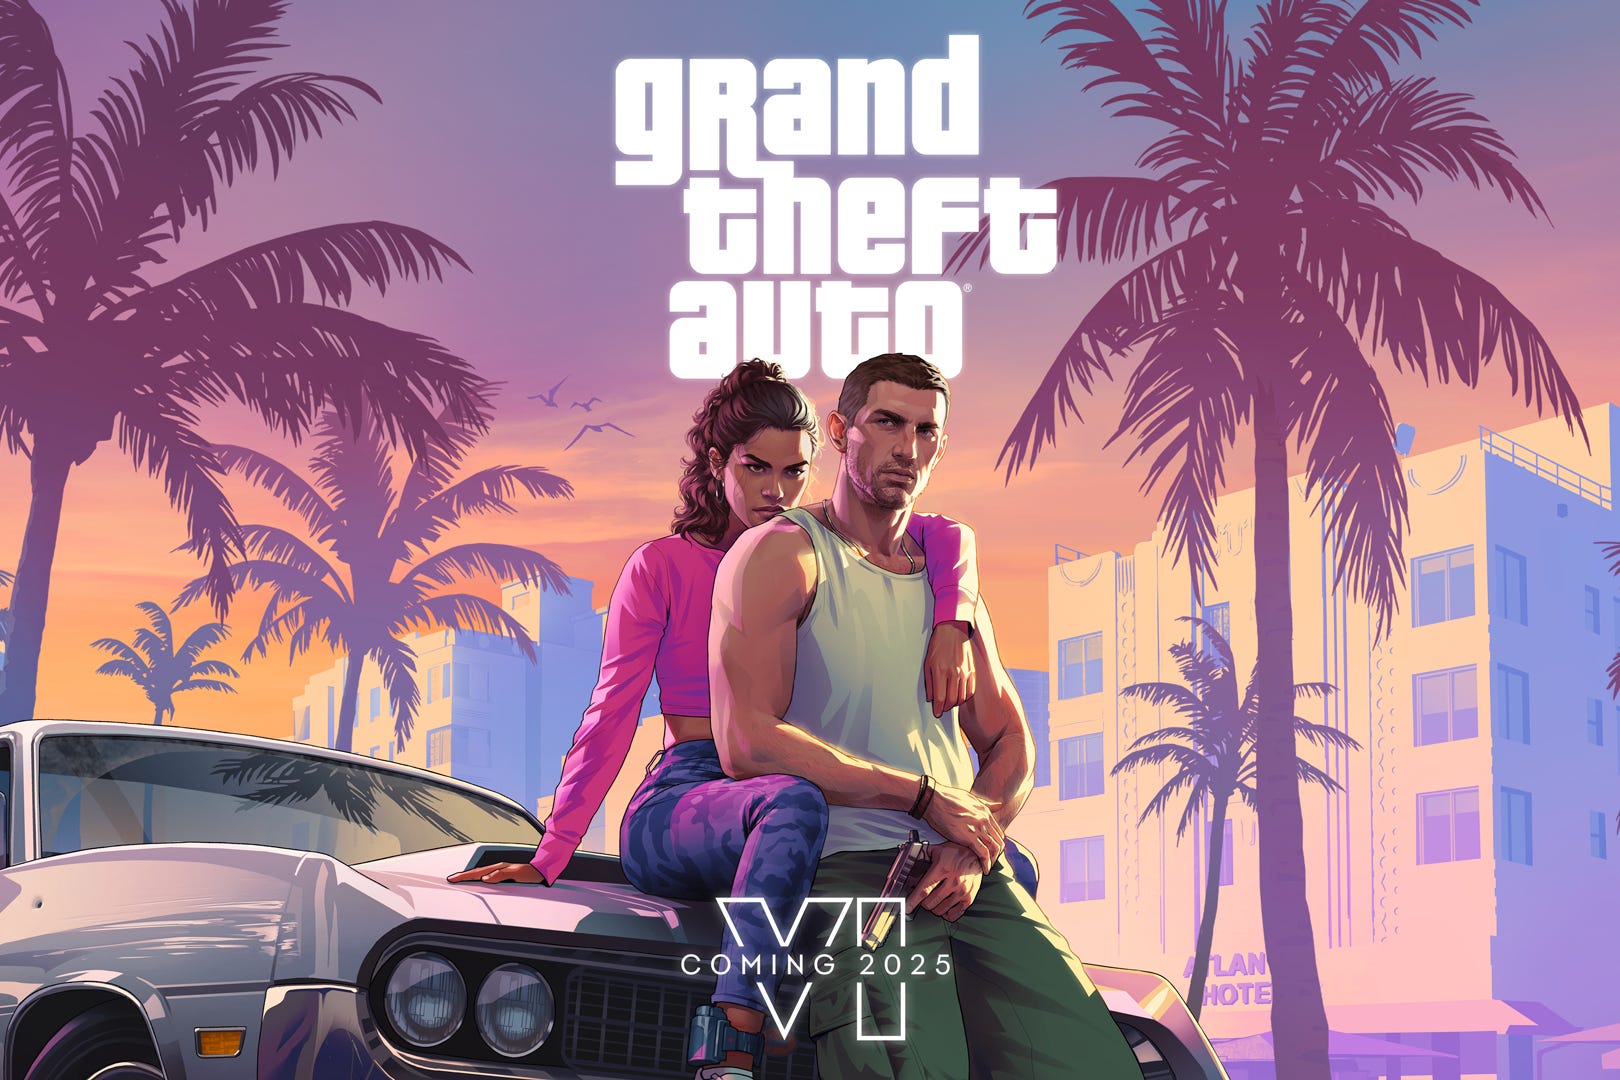 The sixth numbered game in the Grand Theft Auto series which will be released in 2025 (Rockstar)